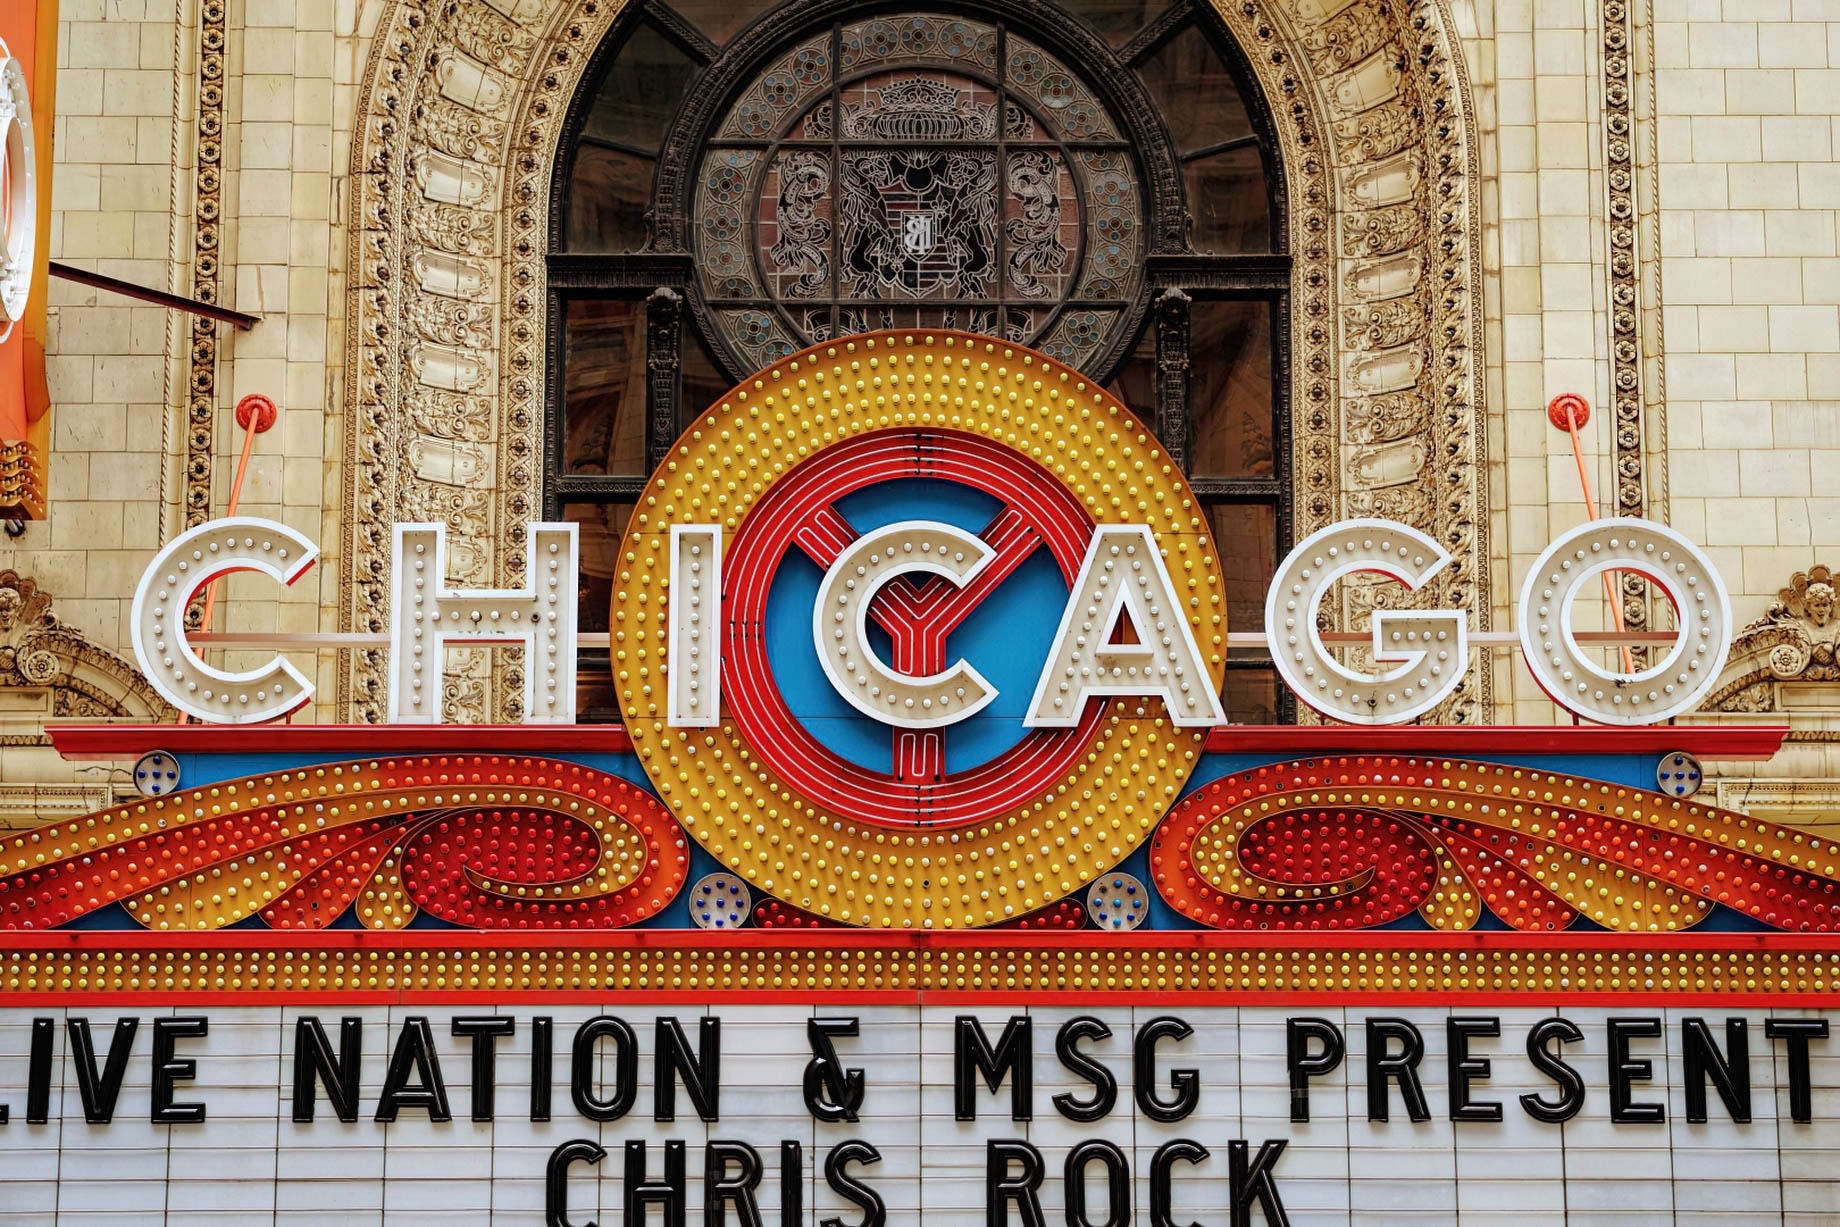 Viceroy Chicago Hotel – Chicago, IL, USA – The Chicago Theatre